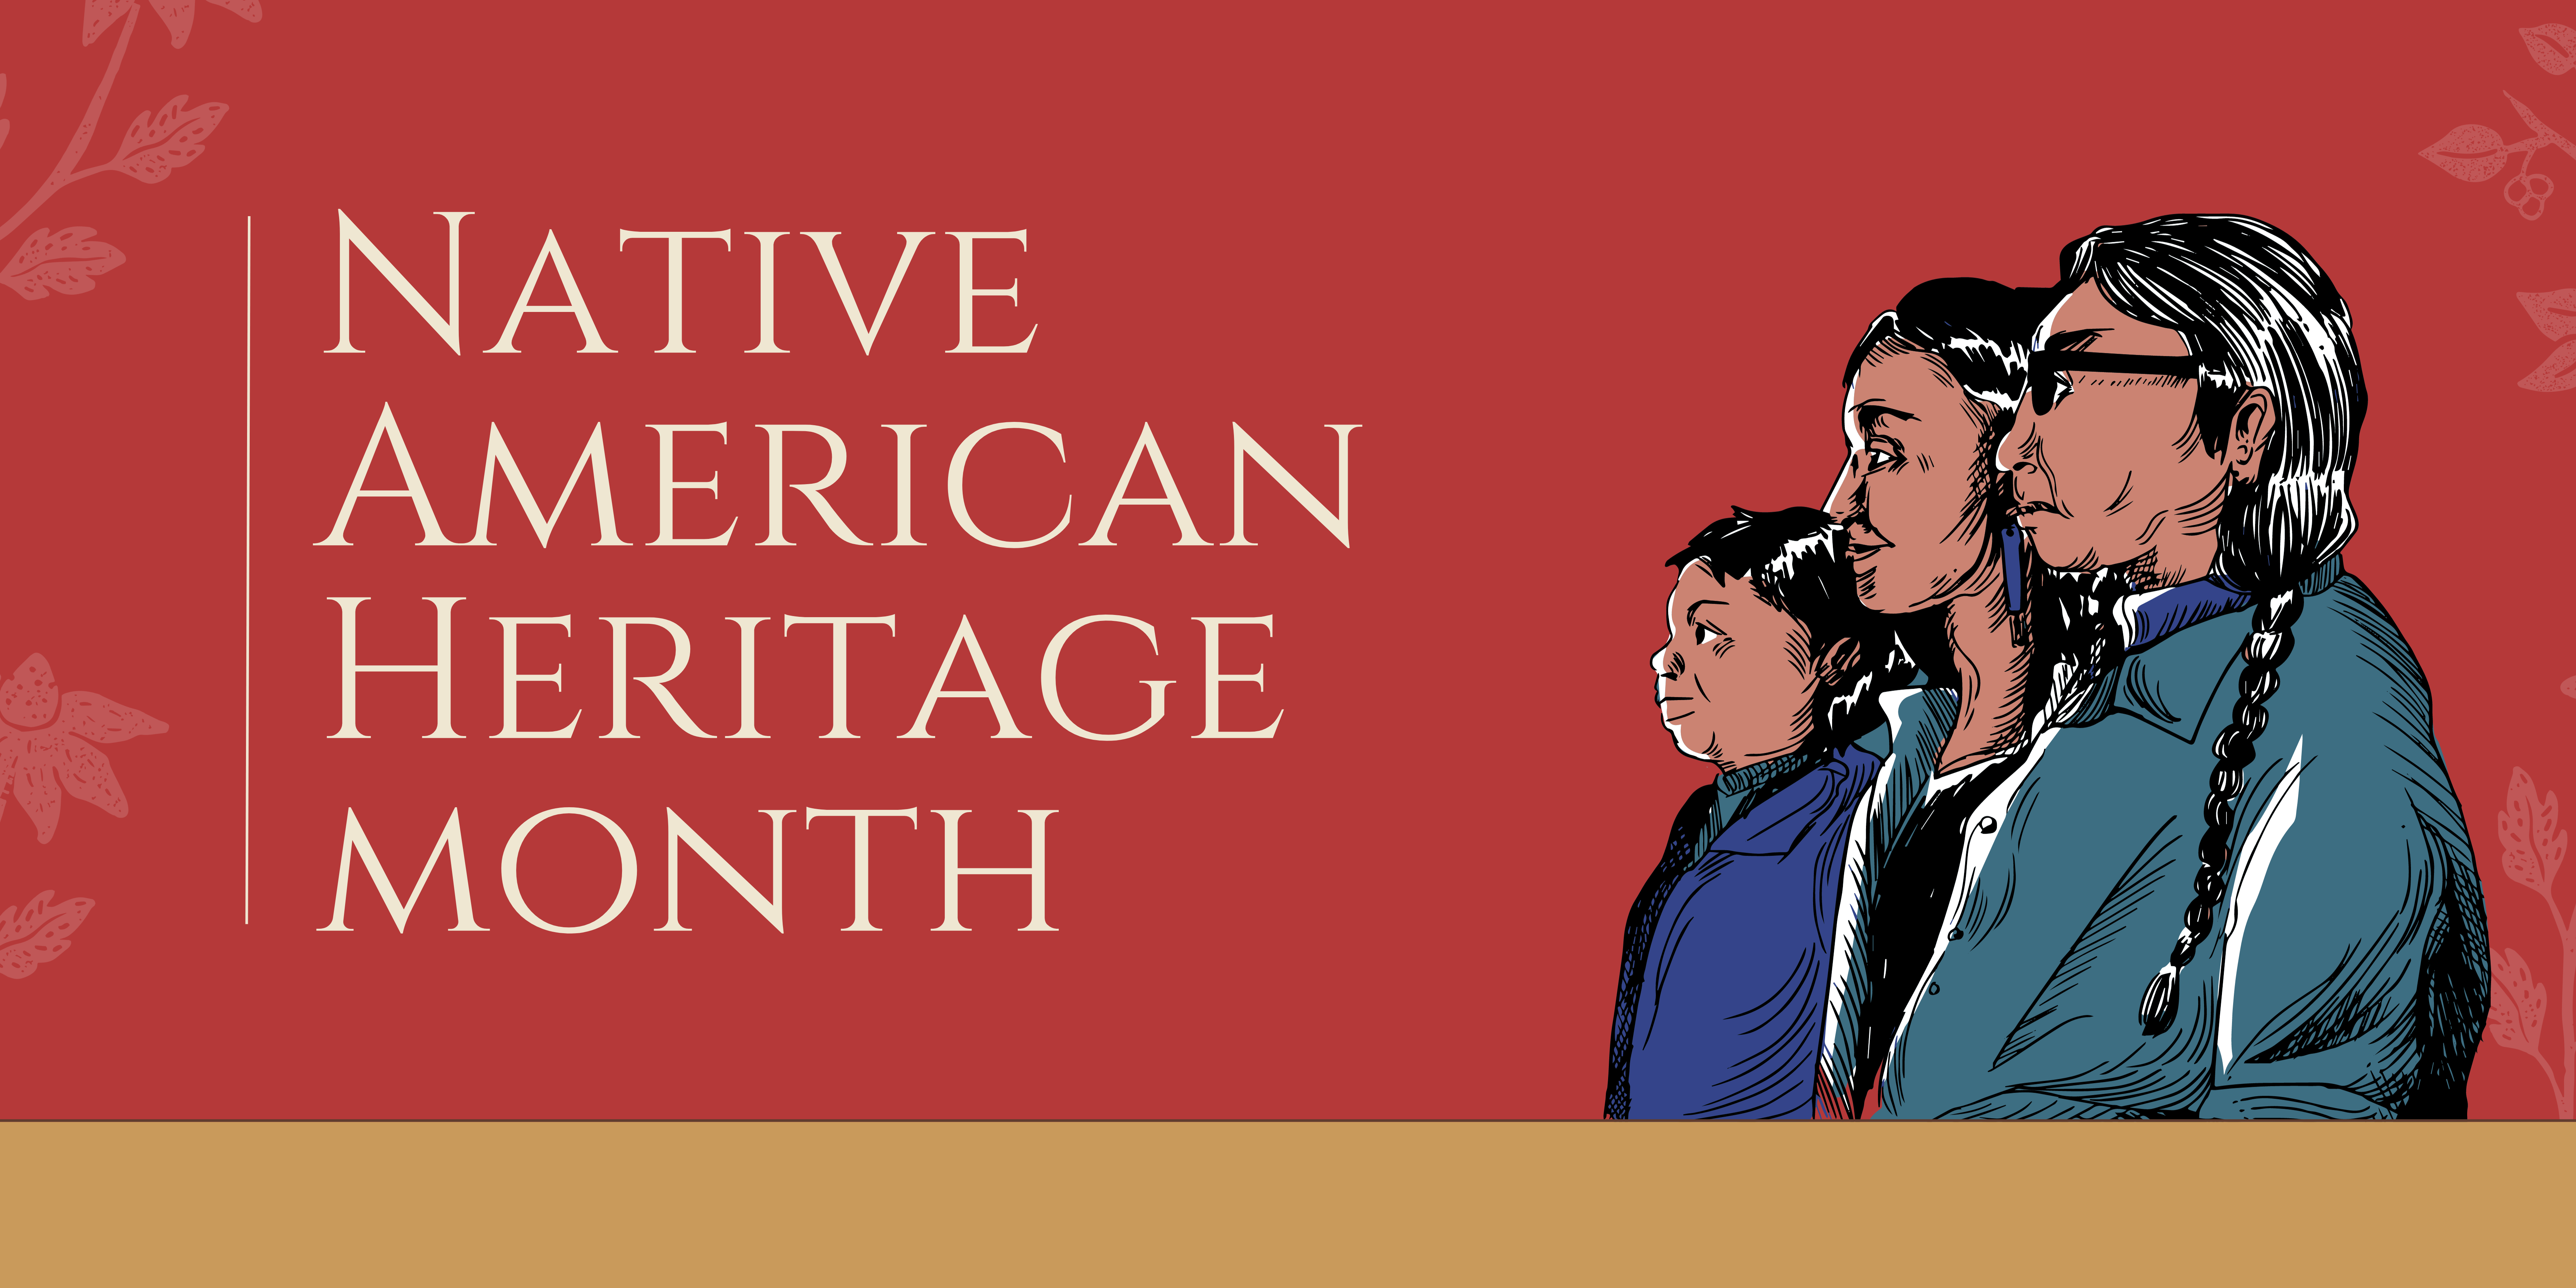 Banner with a graphic of three people that says "Native American Heritage Month"